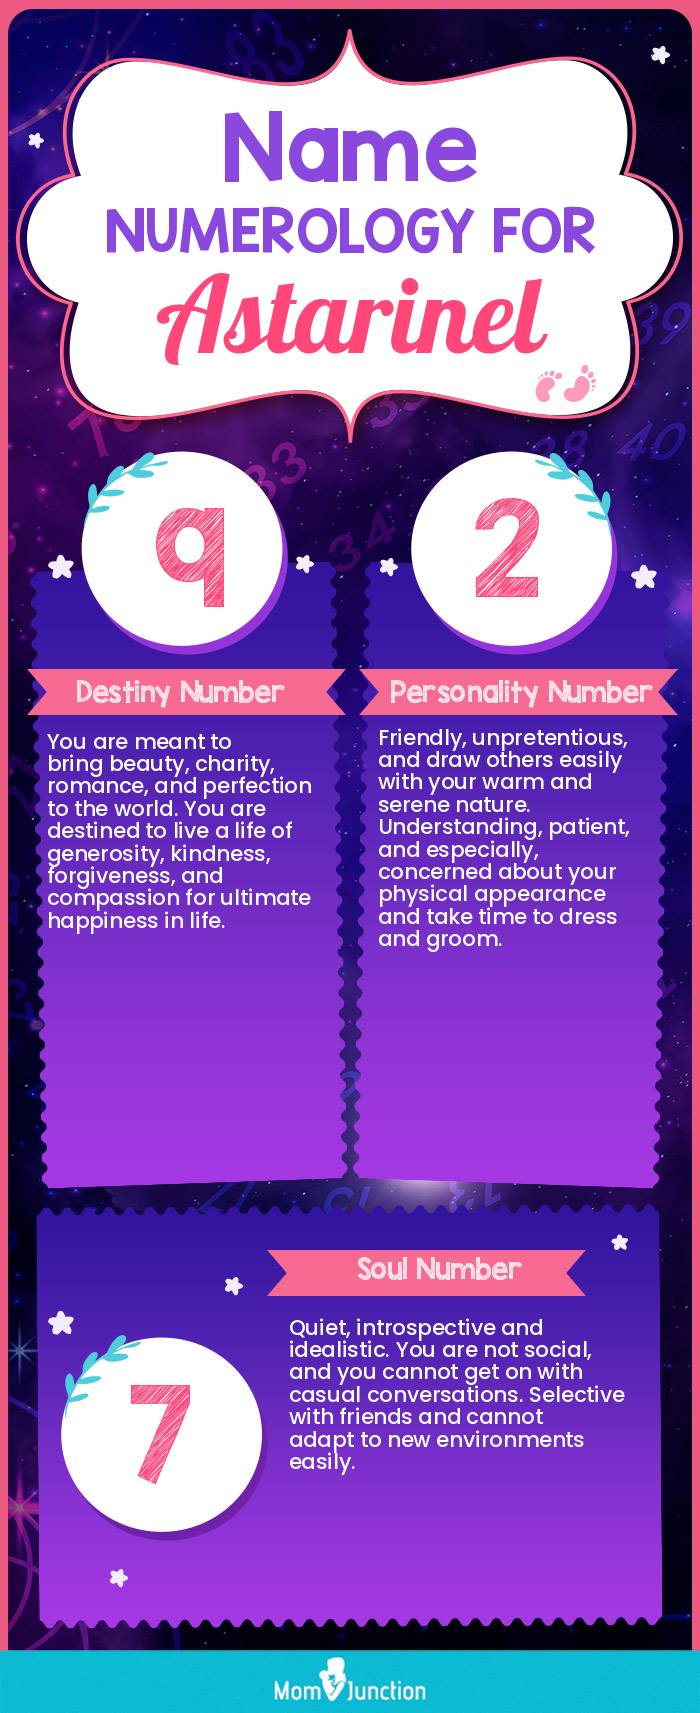 name-numerology-for-astarinel-girl